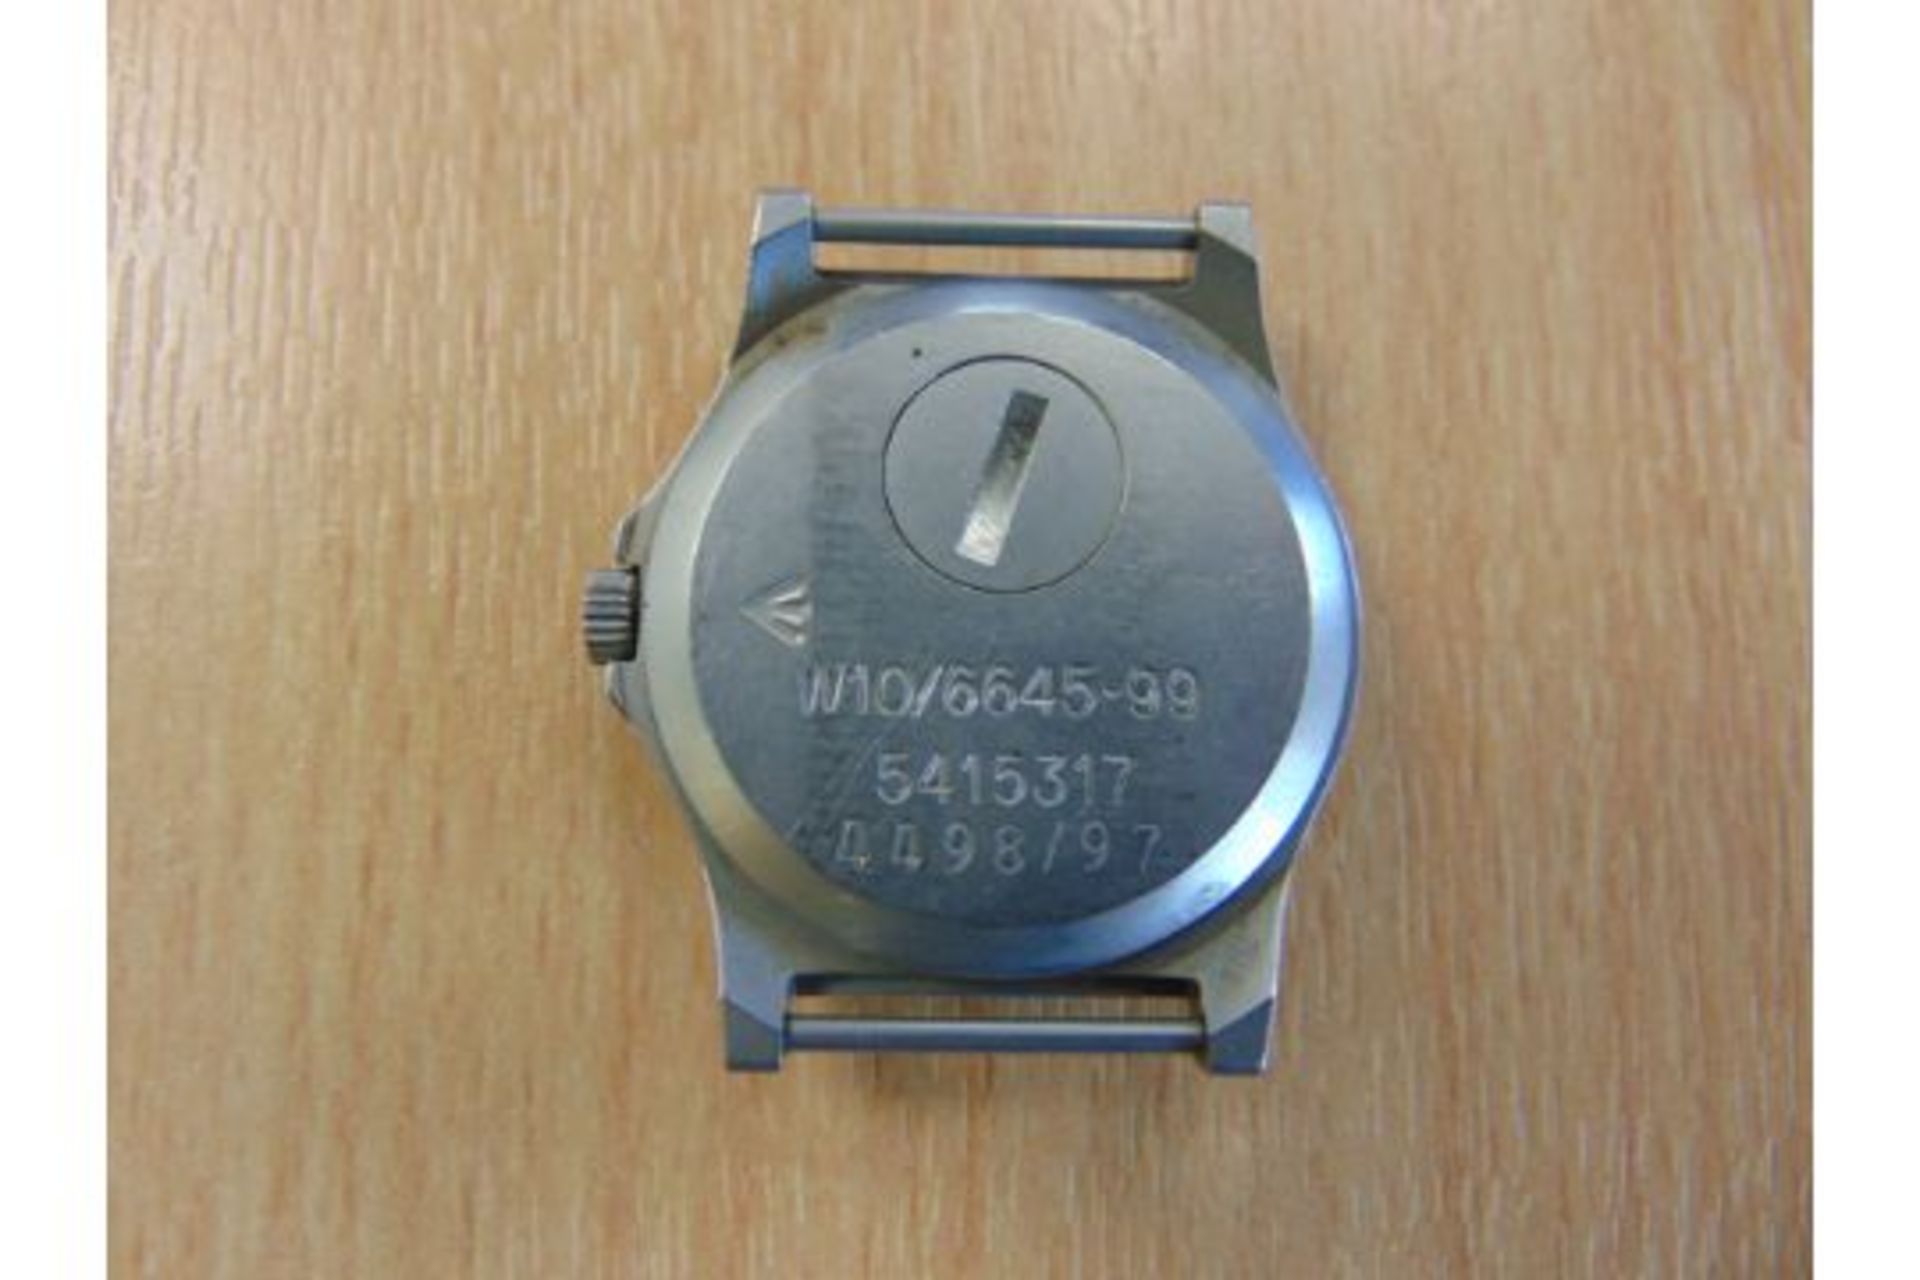 CWC (Cabot Watch Co Switzerland), British Army W10 Service Watch Nato Marks, Water Resistant to 5ATM - Image 3 of 4